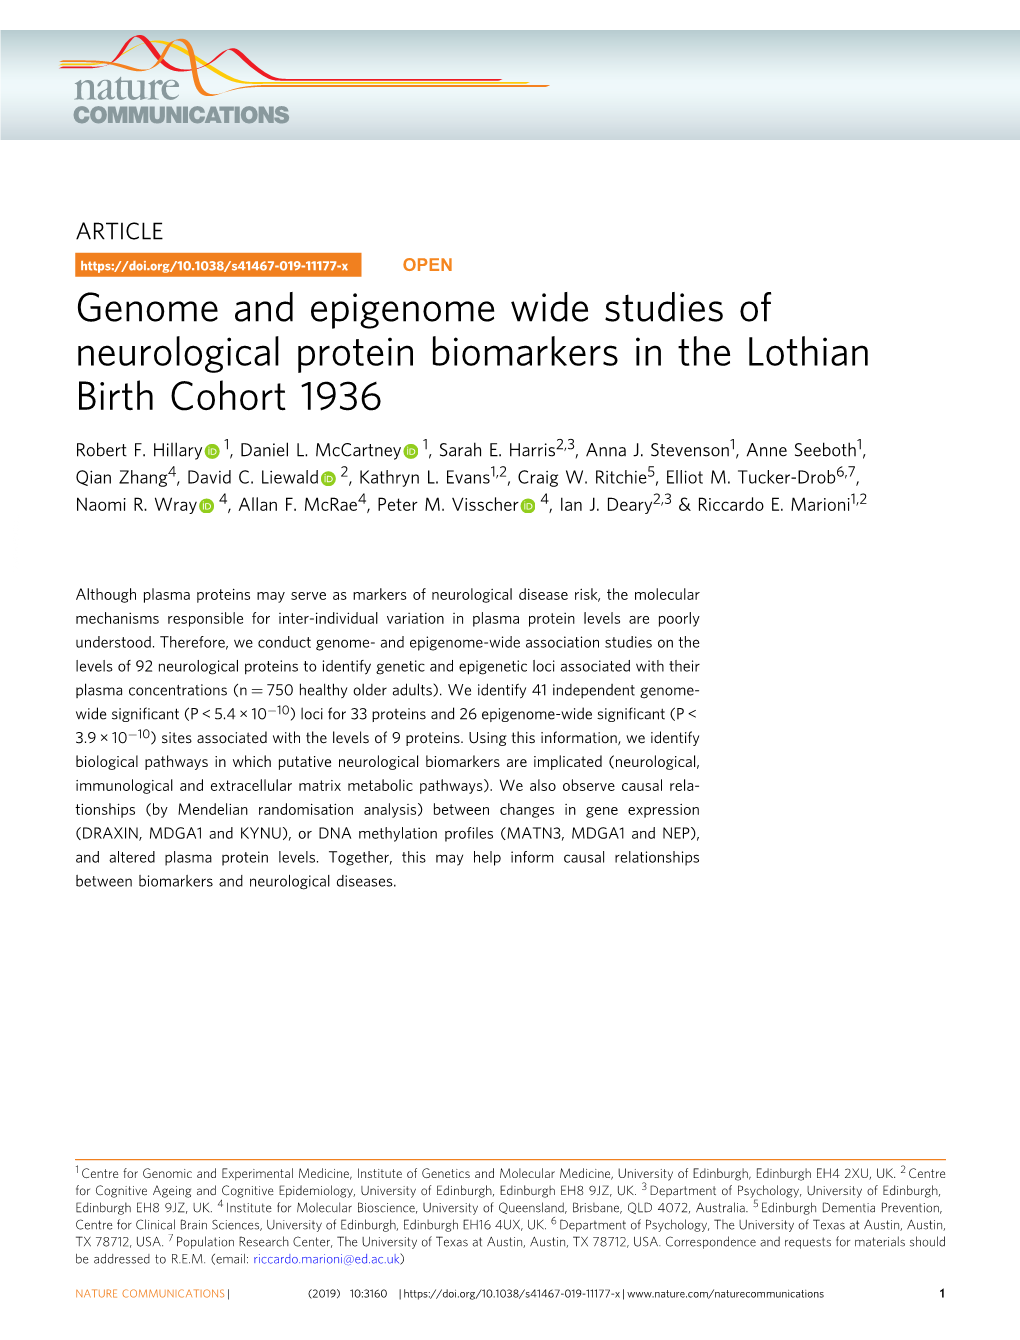 Genome and Epigenome Wide Studies of Neurological Protein Biomarkers in the Lothian Birth Cohort 1936